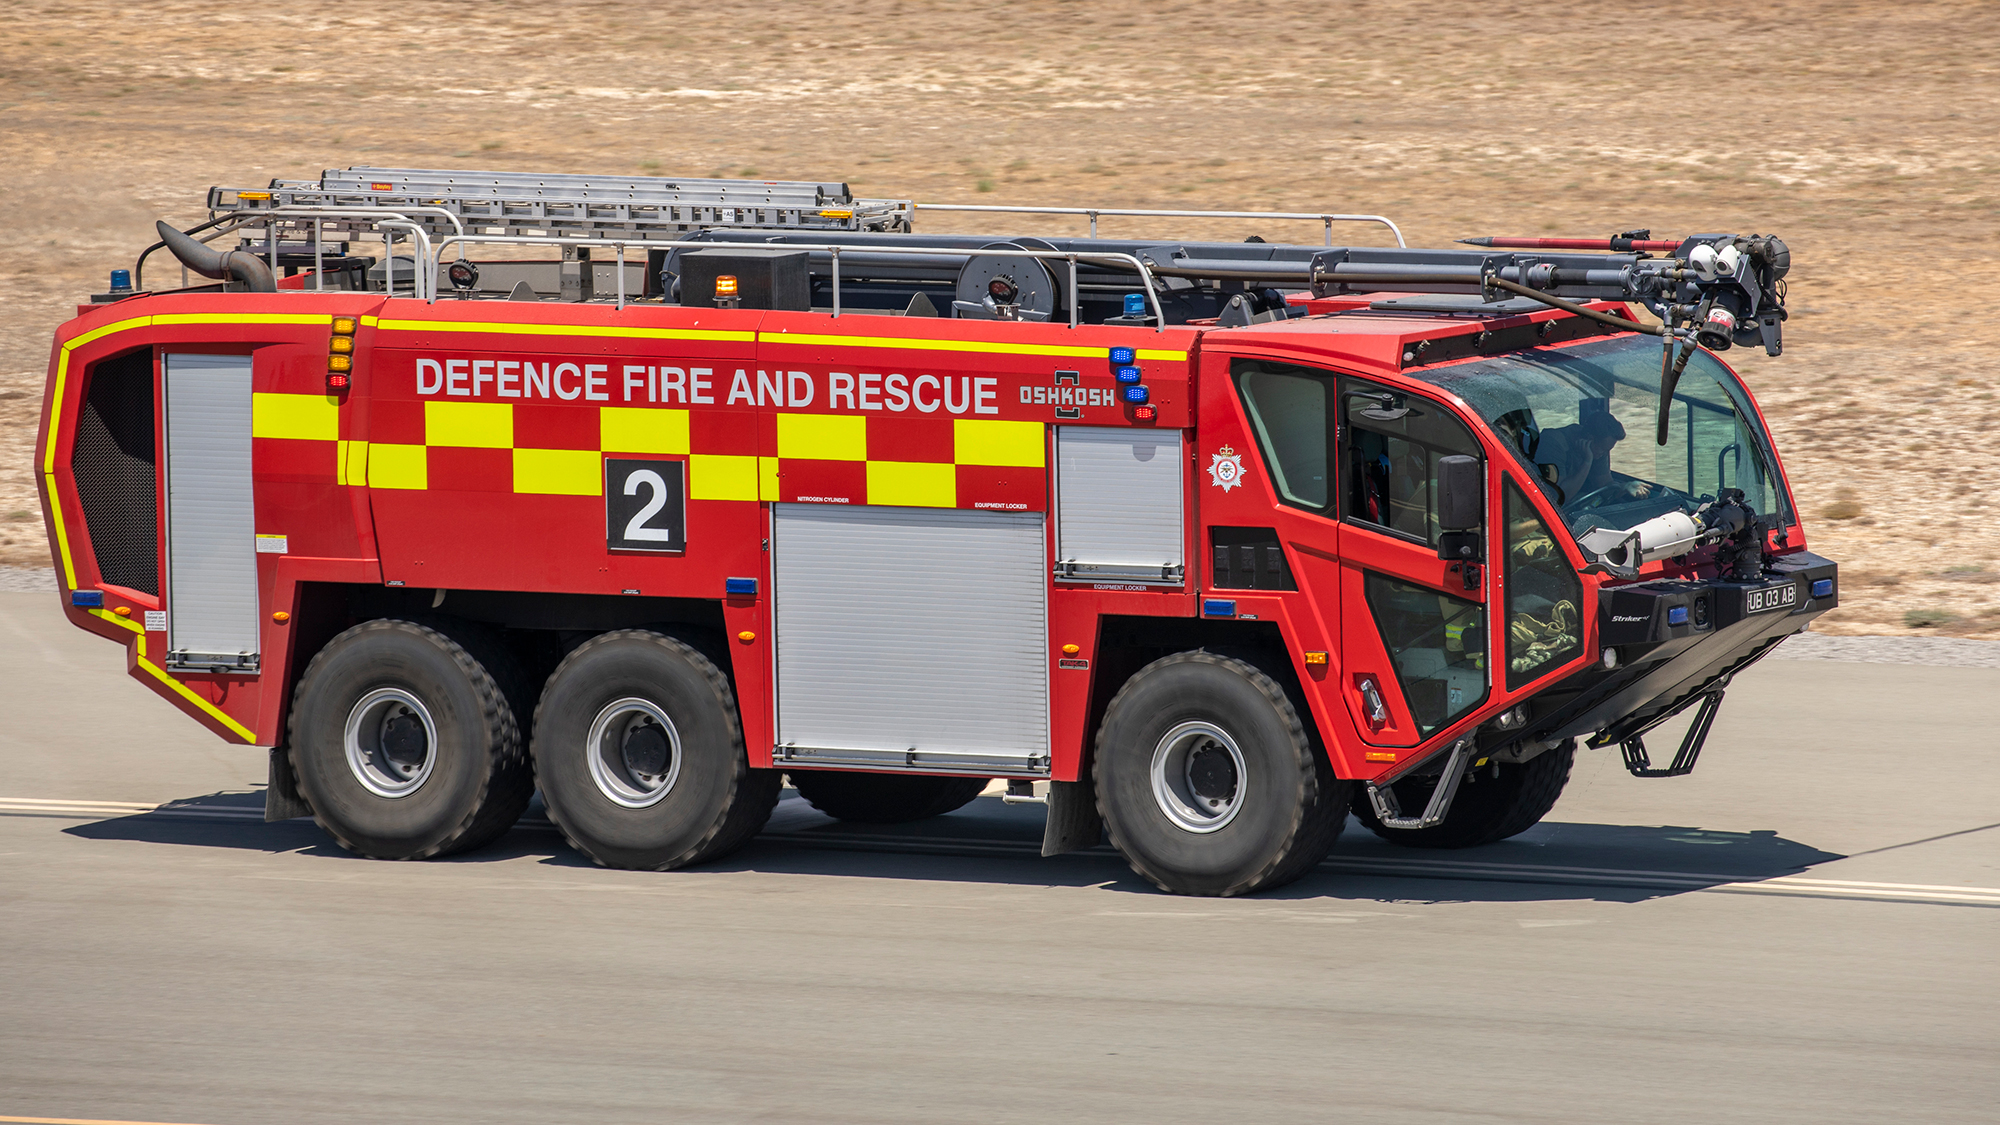 This is a newer kind of UK fire fighting vehicle—an ARFF. The ones that Ukraine are getting are called MFVs and RIVs.